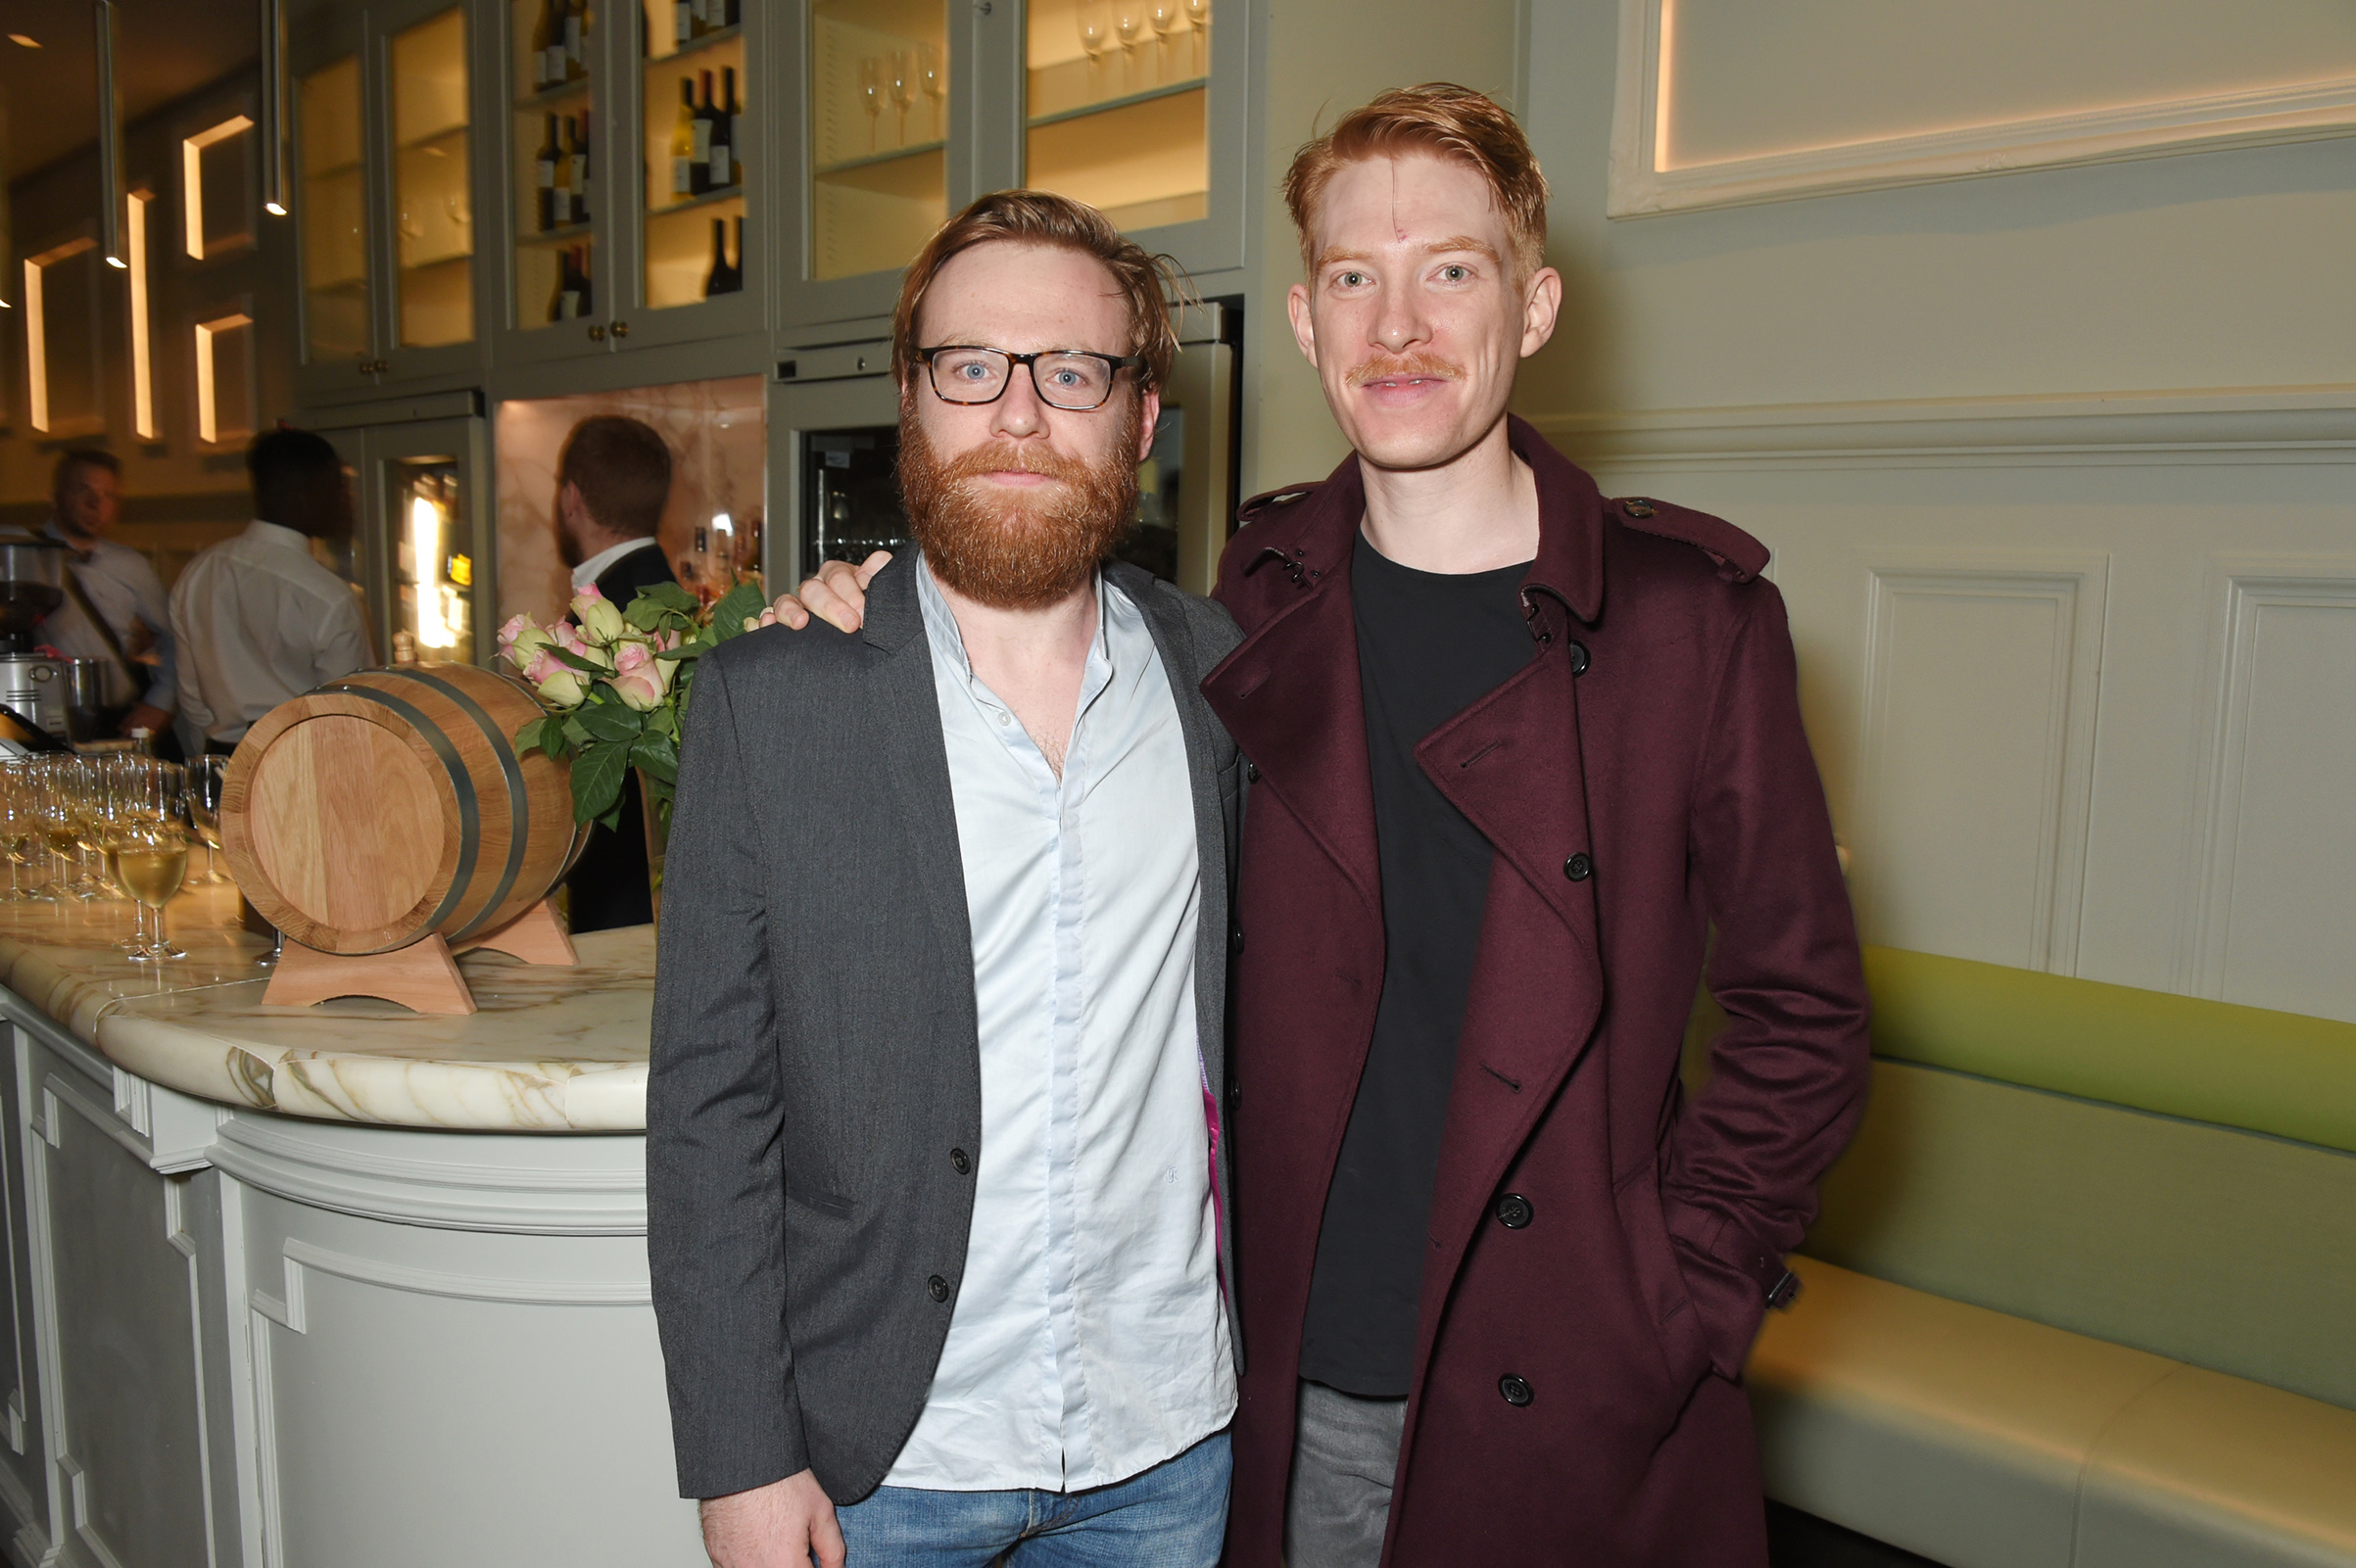 Domhnall Gleeson (r) and brother Brian Gleeson attend the press night after party for "Cat On A Hot Tin Roof" at The National Cafe on July 24, 2017 in London, England. (David M. Benett—Getty Images)